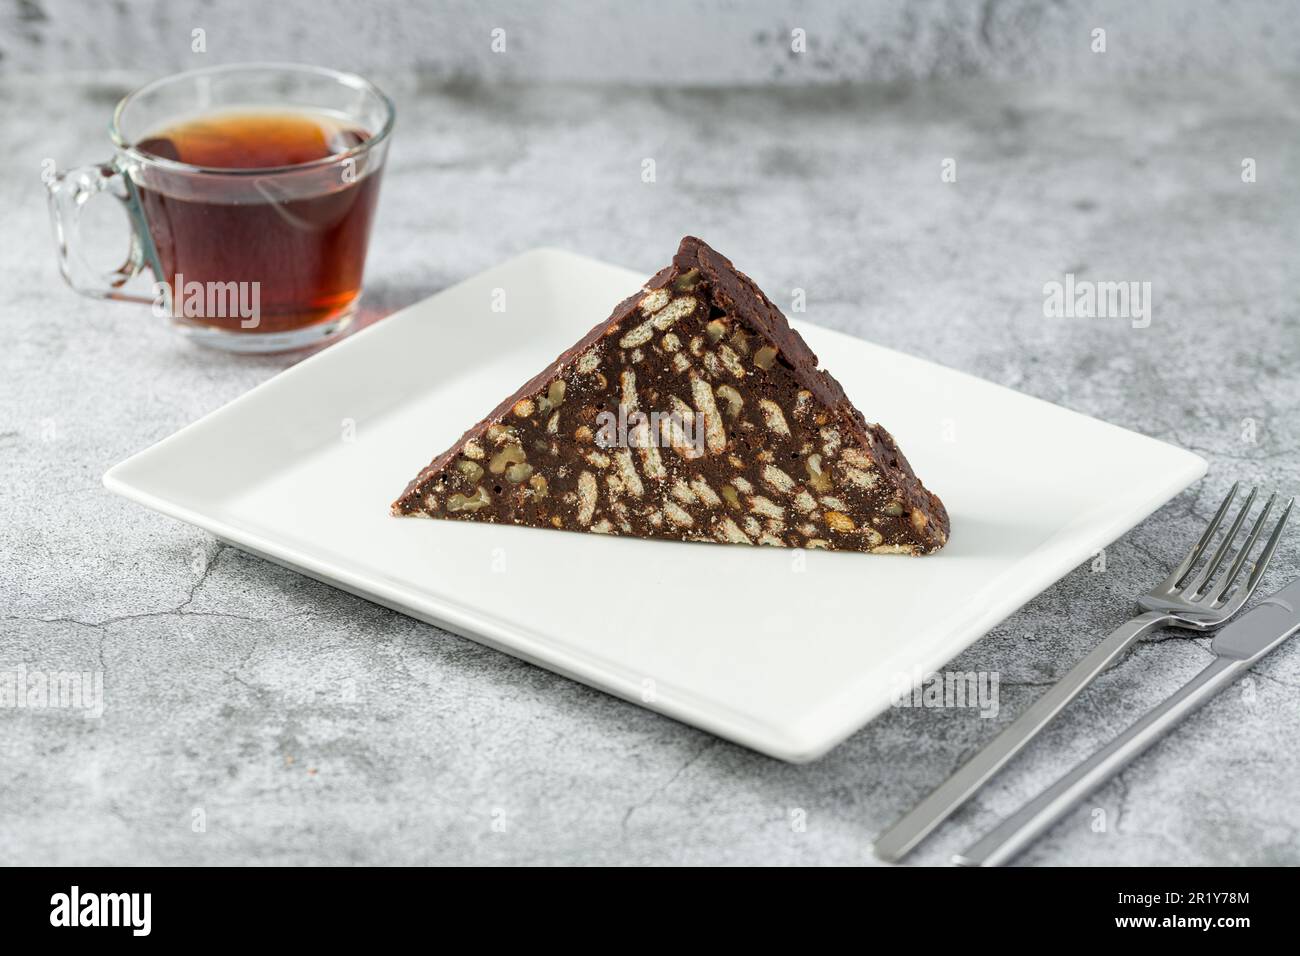 Chocolate mosaic cake with walnuts on a white porcelain plate on a stone background Stock Photo